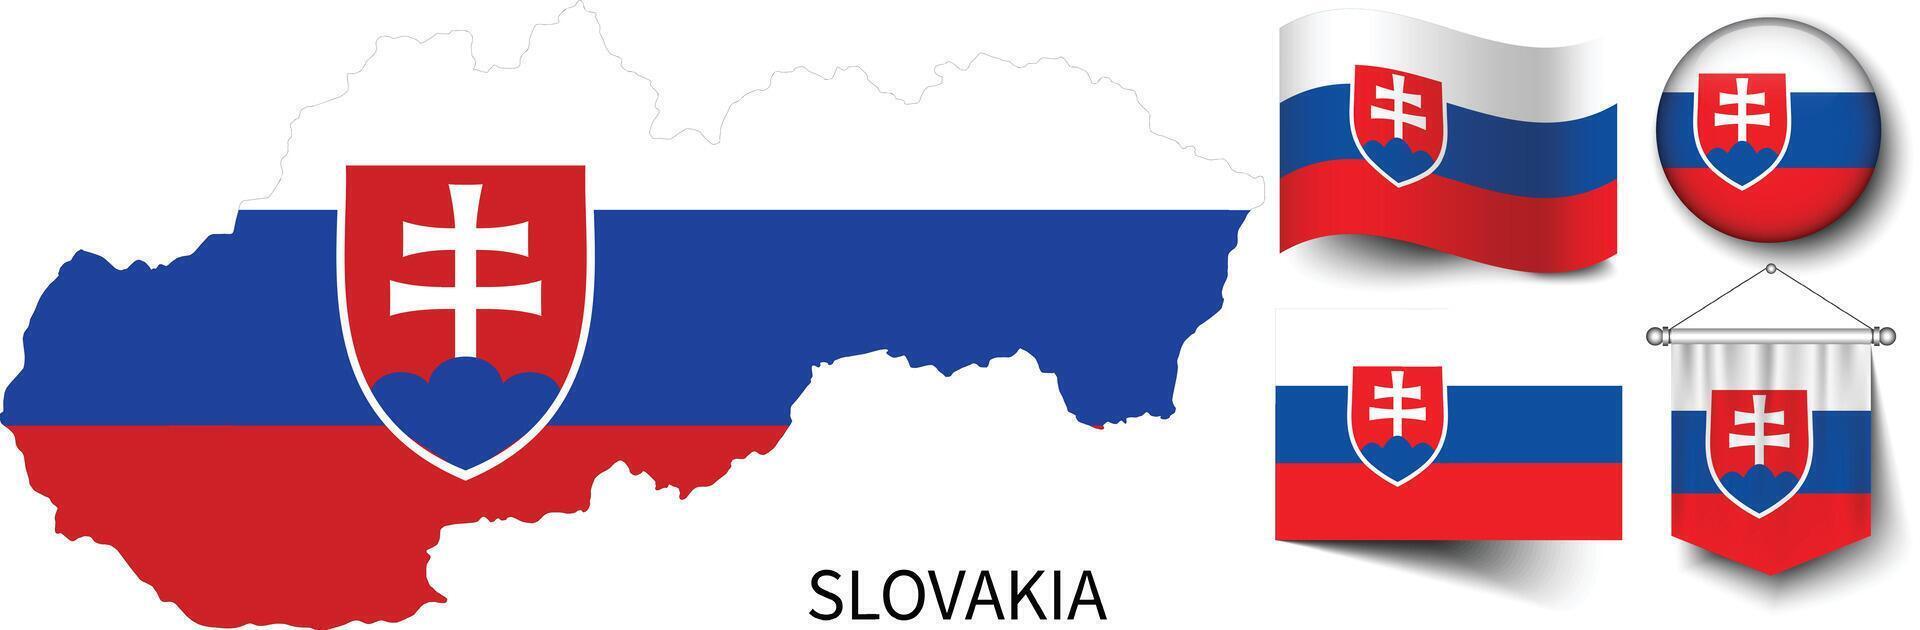 The various patterns of the Slovakia national flags and the map of the Slovakia borders vector